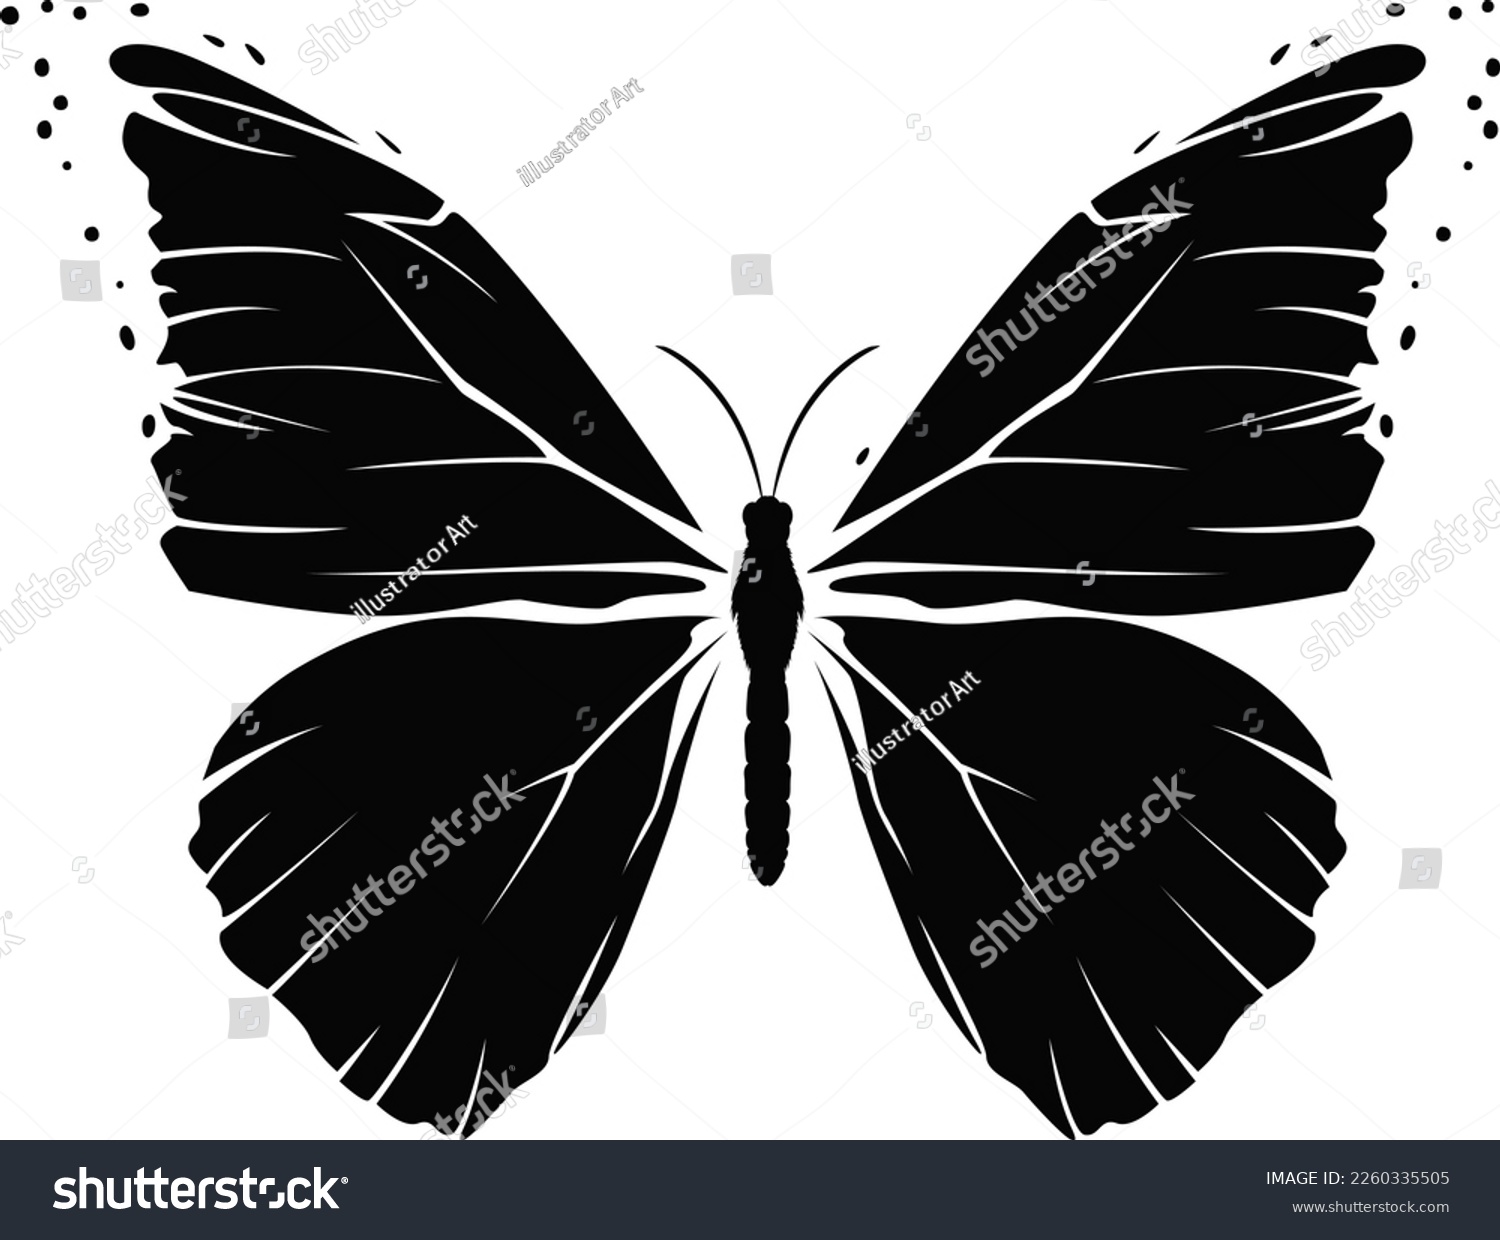 SVG of butterfly silhouette vector Butterfly svg, Butterfly vector illustration, butterfly logo svg